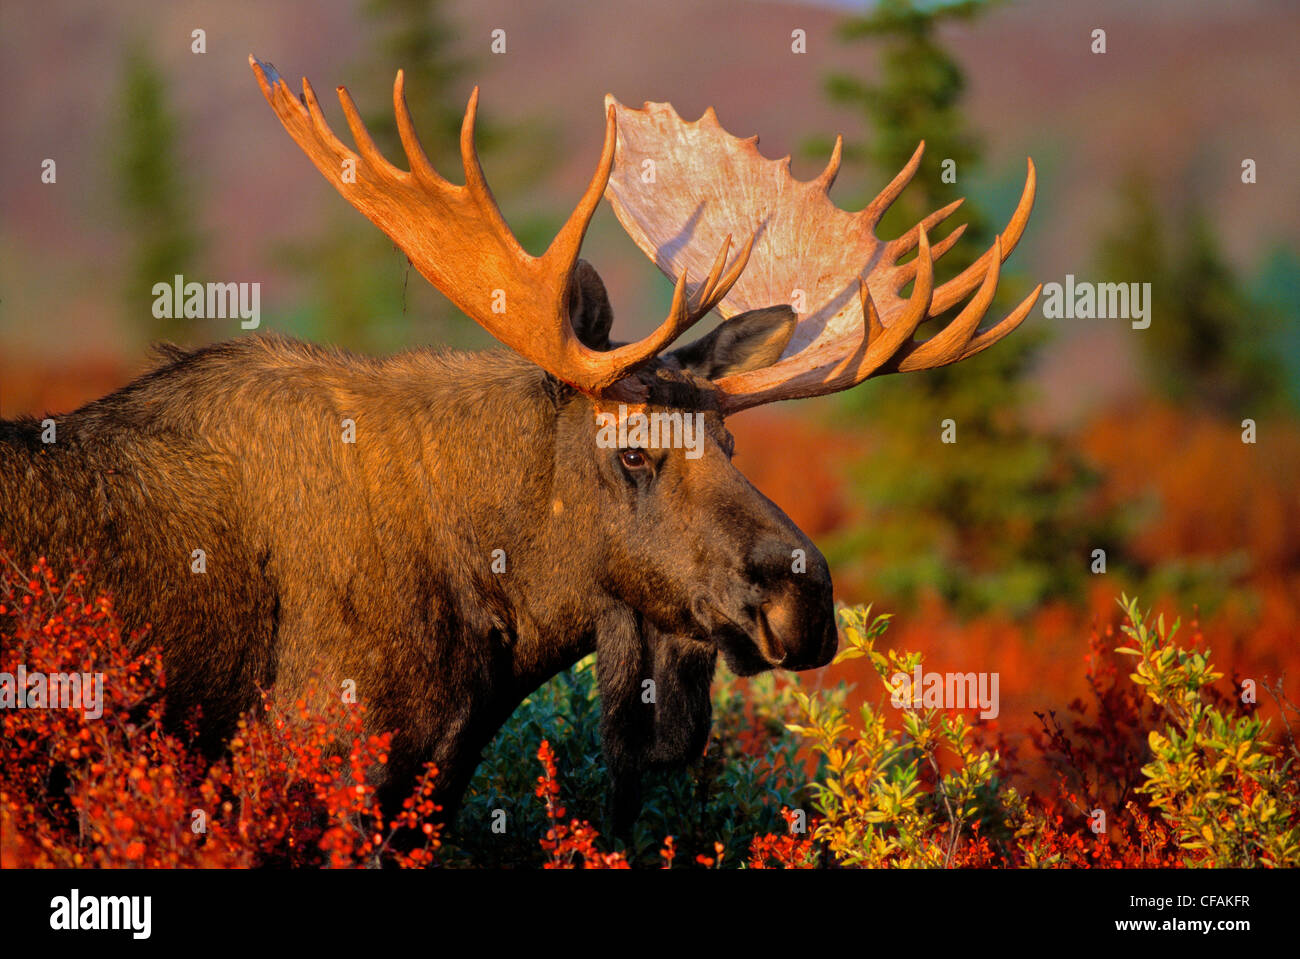 Close up of a Moose bull (Alces alces) in the Autumn foliage, Northwest Territories, Canada. Stock Photo